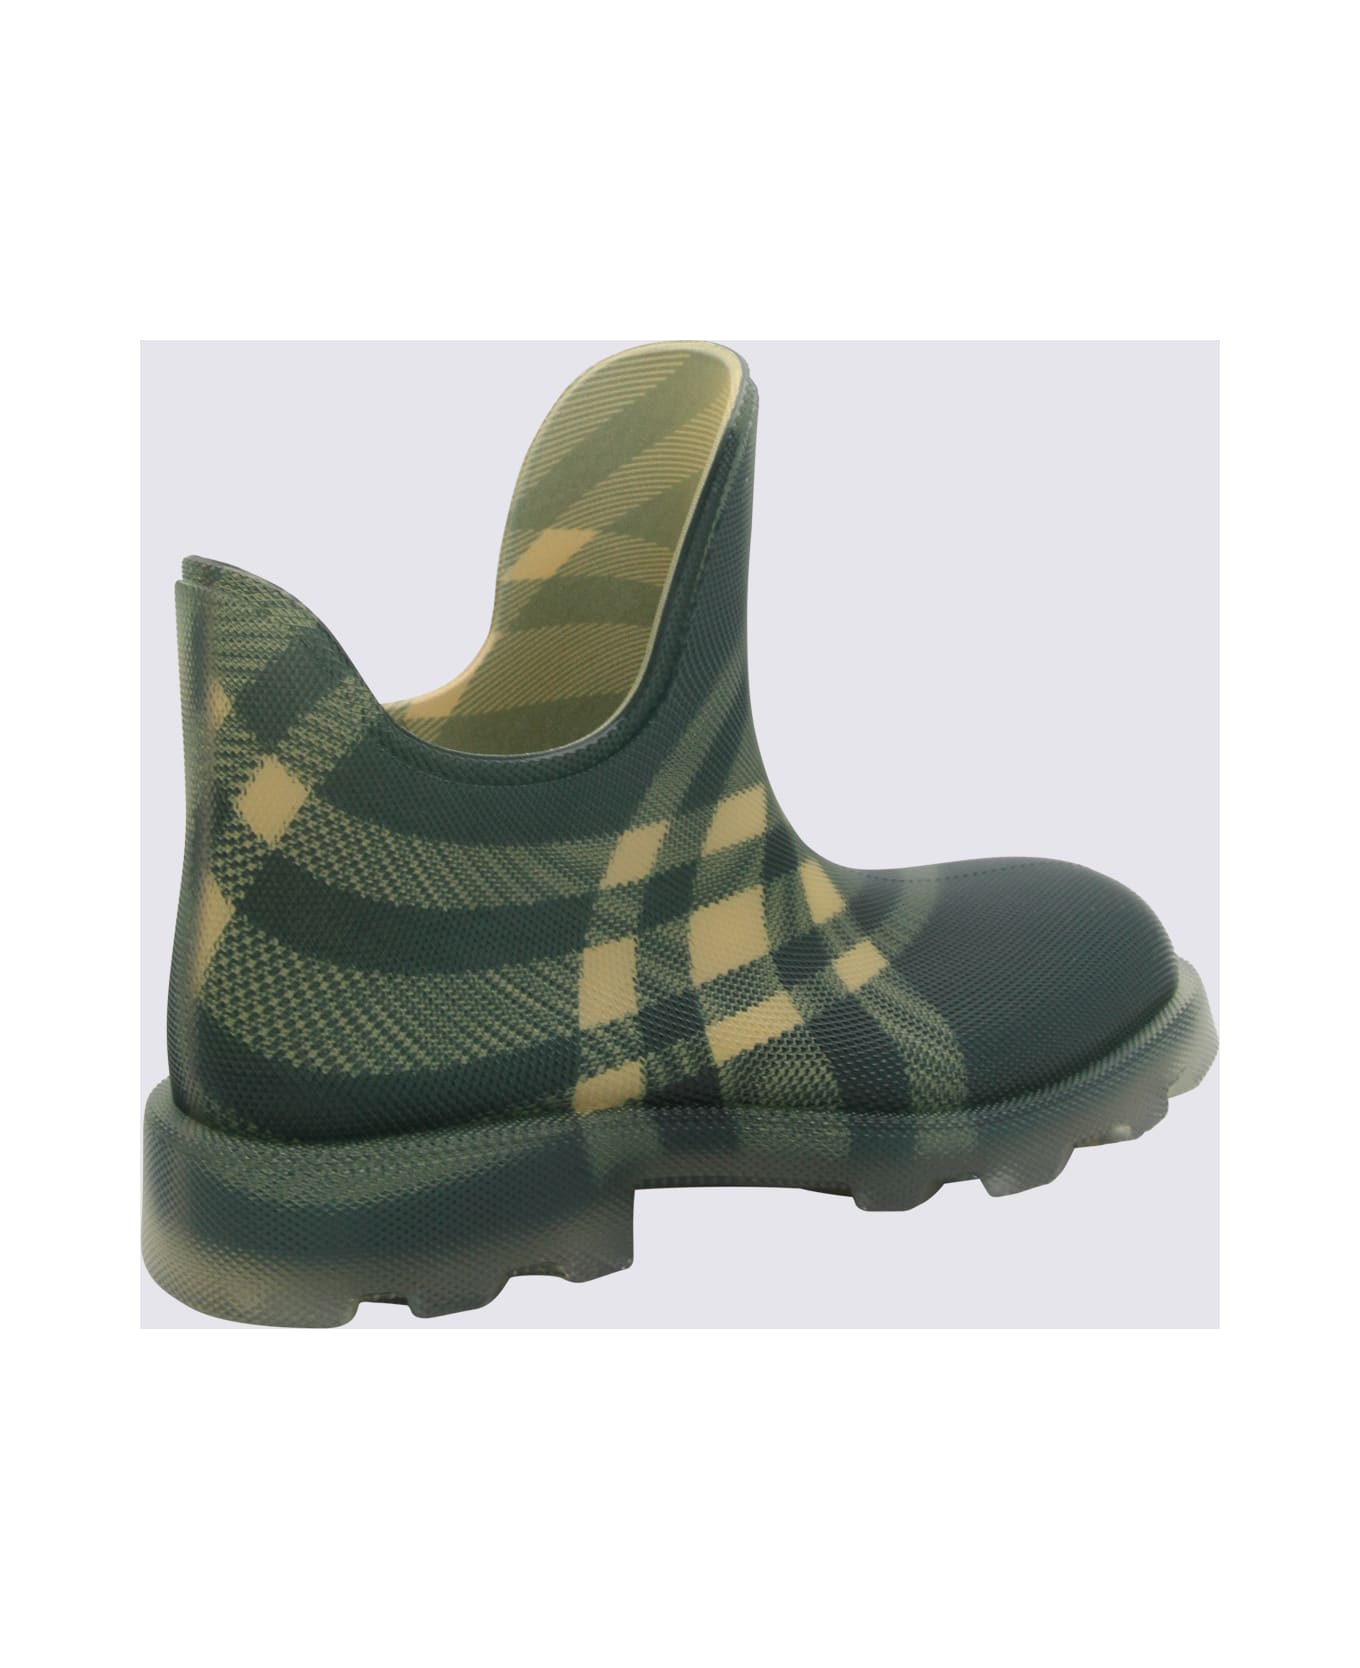 Burberry Green Boots - Fine-tune your instincts in these juniors football boots